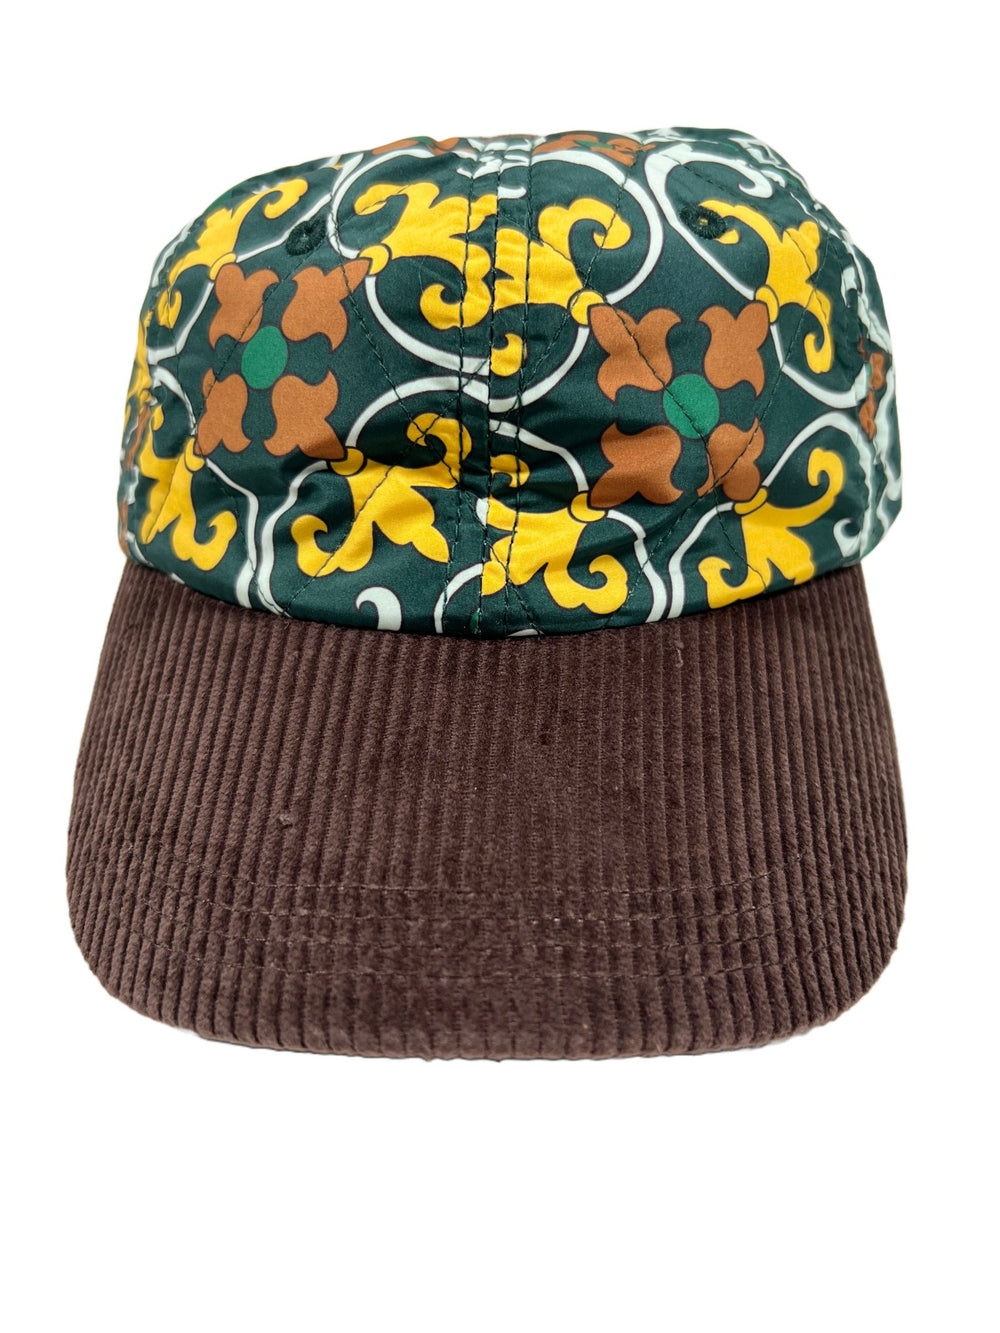 A DROLE DE MONSIEUR hat with a floral pattern on it, featuring a buckle closing system.